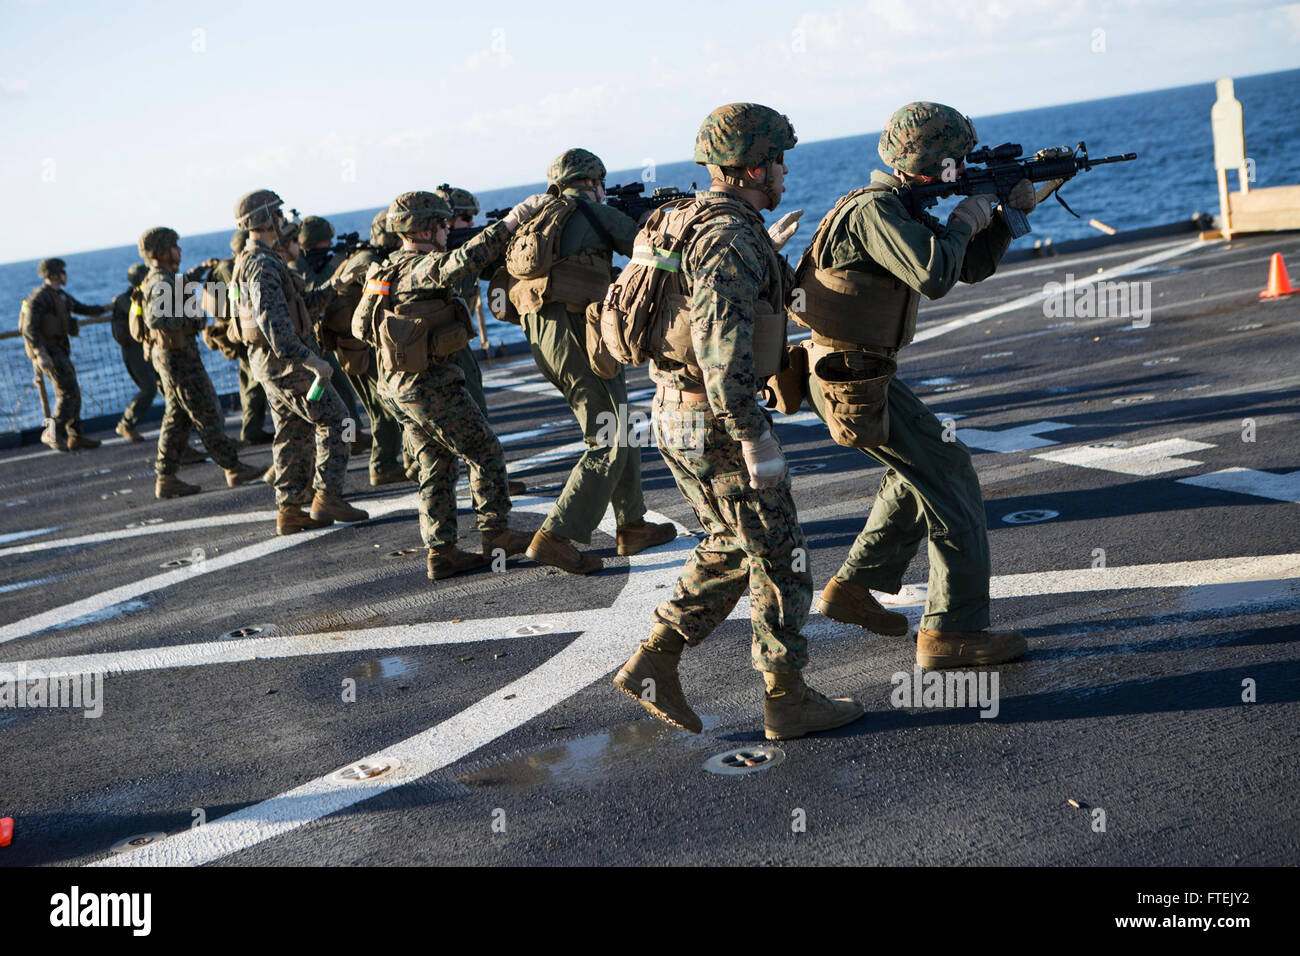 150105-M-AR522-143 MEDITERRANEAN SEA (Jan. 5, 2015) Marines assigned to Kilo Company, Battalion Landing Team 3rd Battalion, 6th Marine Regiment, 24th Marine Expeditionary Unit, fire their service rifles in the movement-to-contact phase of a live-fire qualification aboard USS Fort McHenry (LSD 43) Jan. 5, 2015. The 24th MEU and Iwo Jima Amphibious Ready Group are conducting naval operations in the U.S. 6th Fleet area of operations in support of U.S. national security interests in Europe. (U.S. Marine Corps photo by Sgt. Devin Nichols/Released) Stock Photo